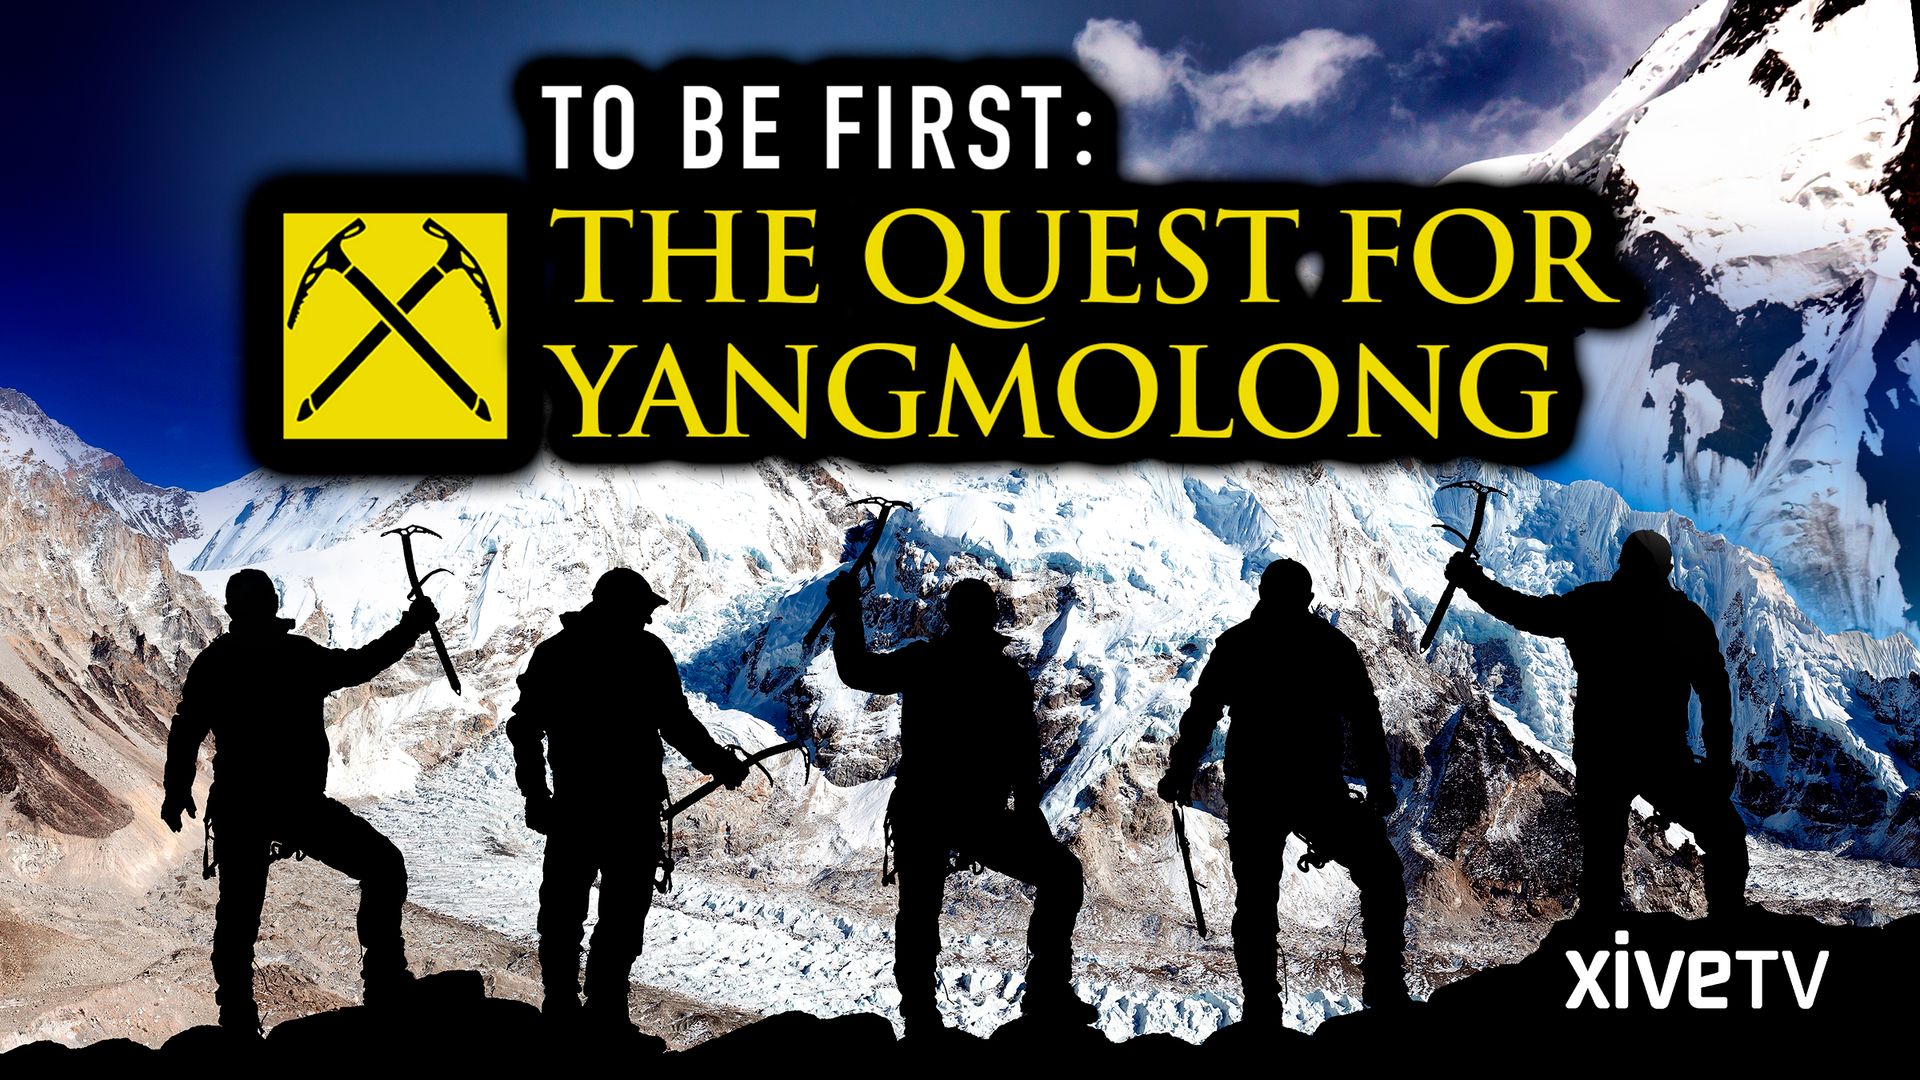 To Be First: The Quest for Yangmolong Backdrop